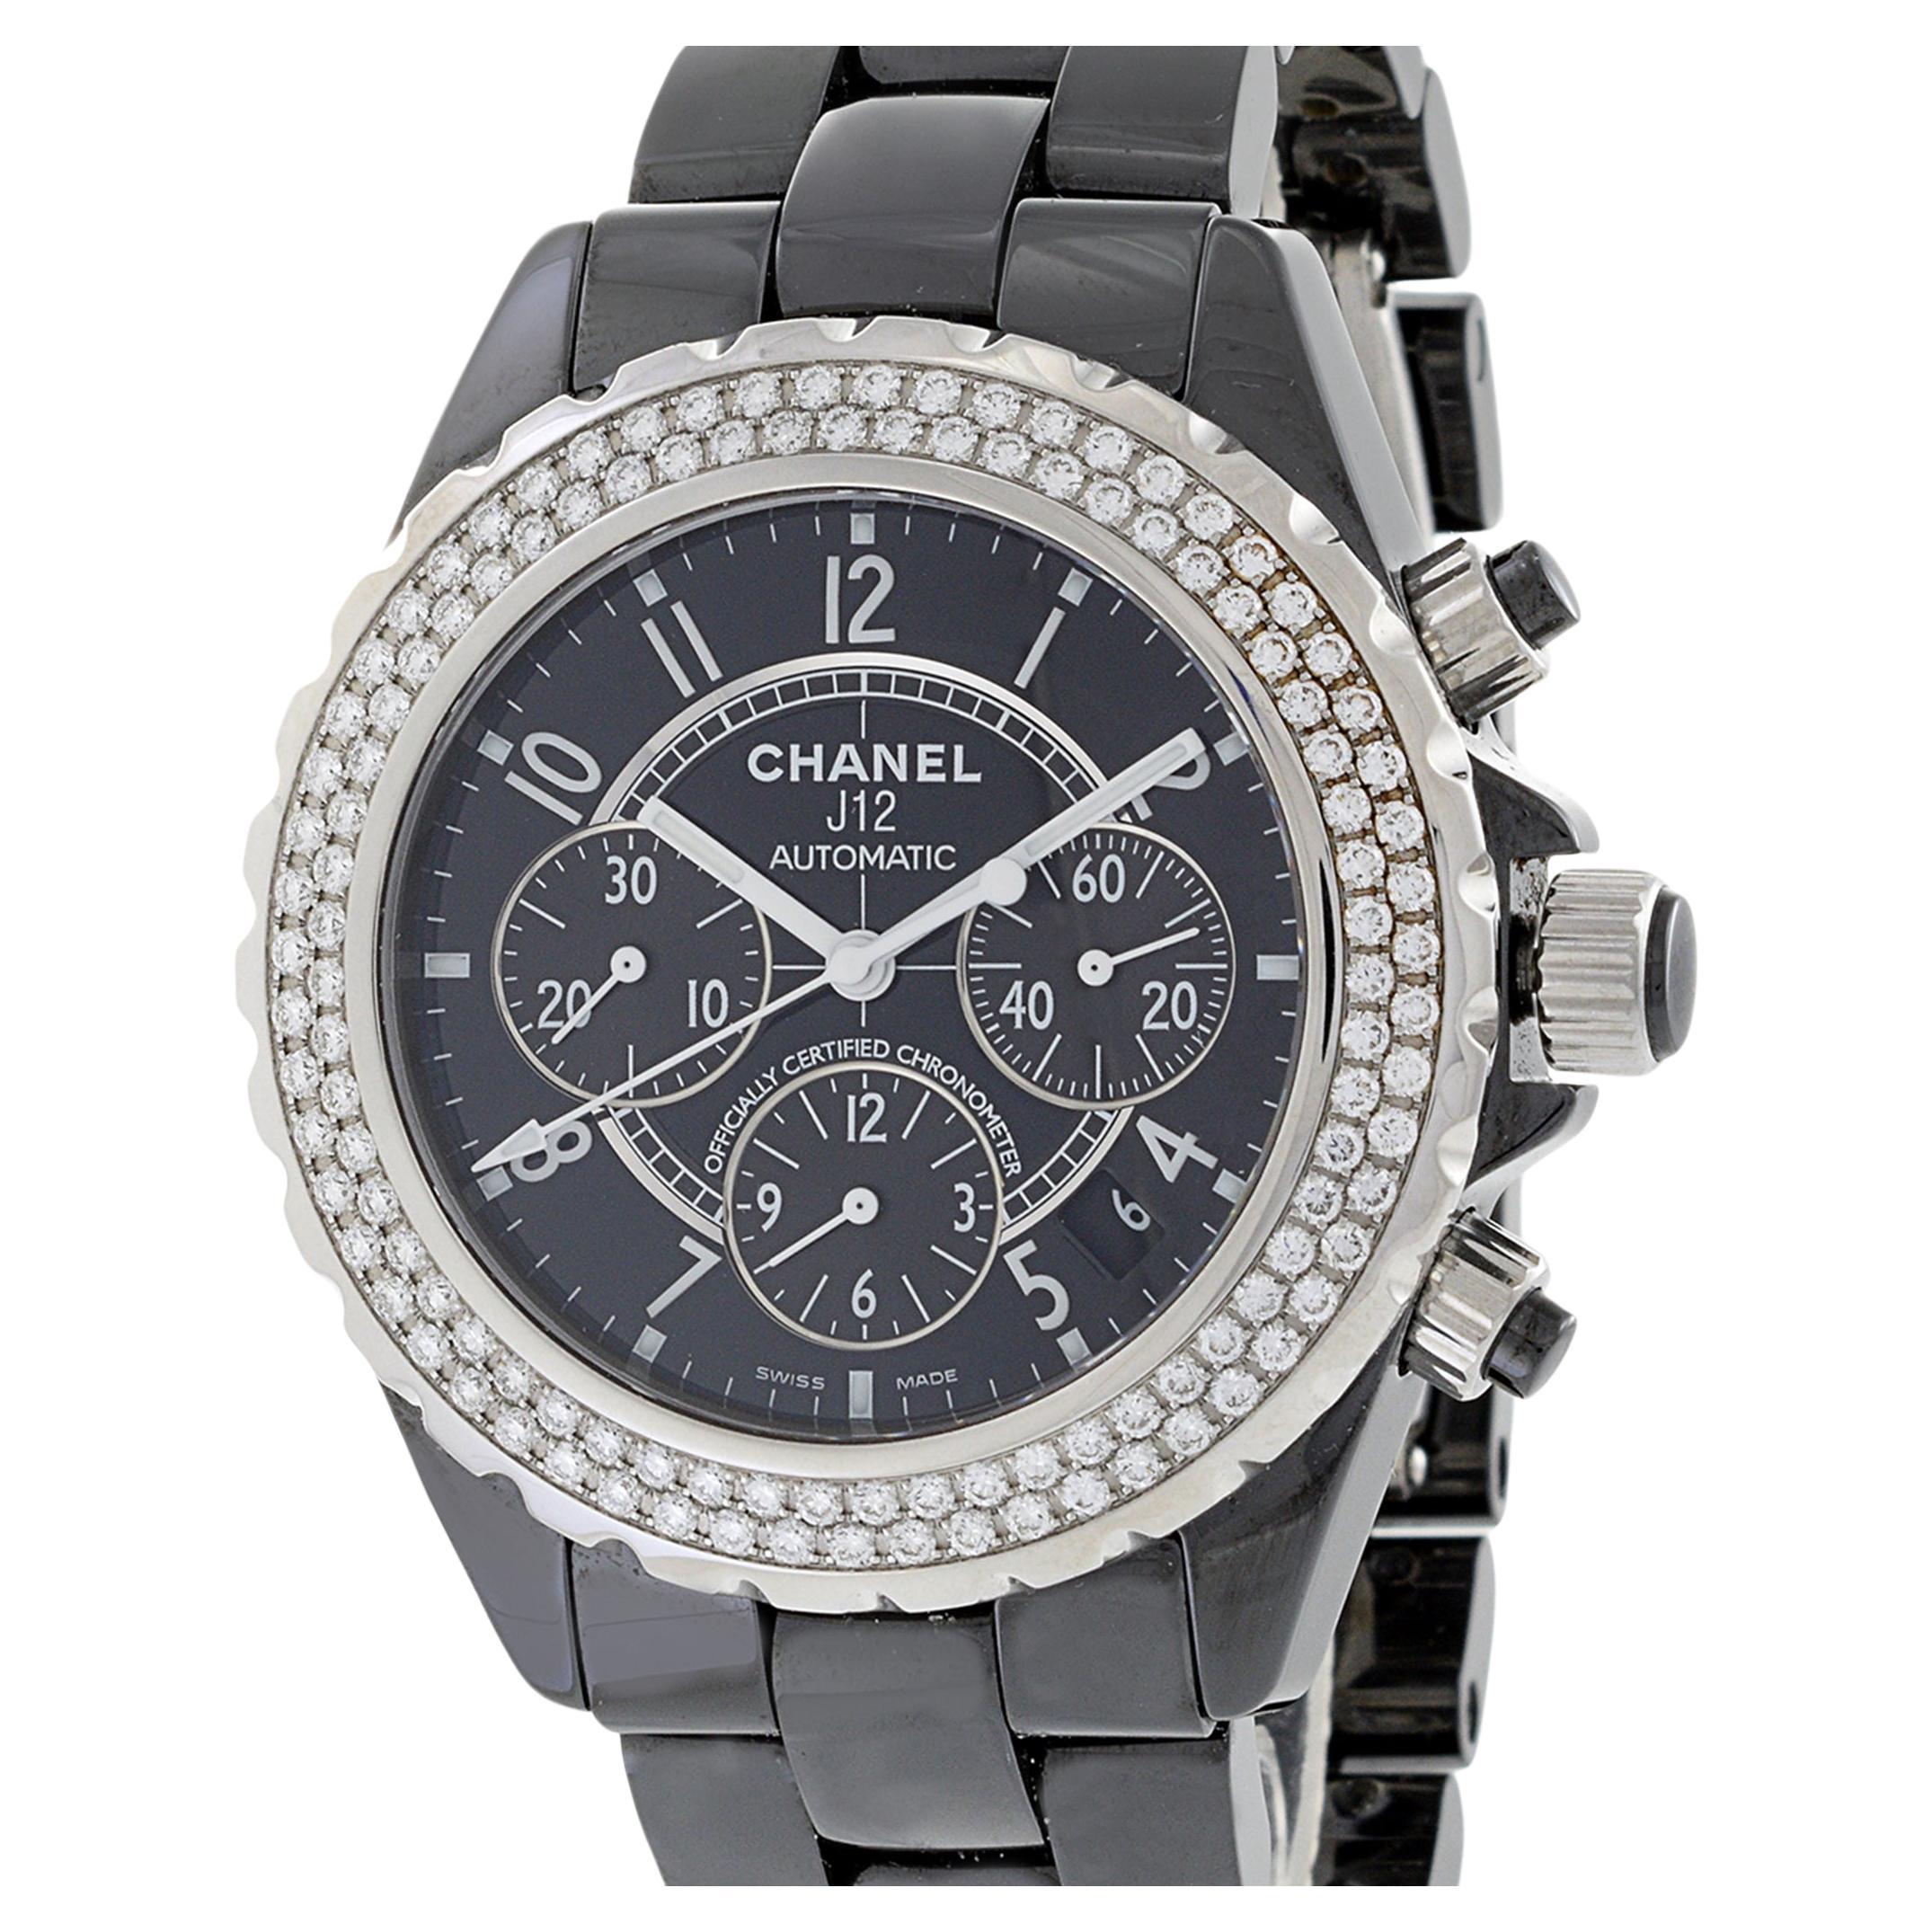 Chanel J12 Chronograph Automatic Ceramic and Diamonds For Sale